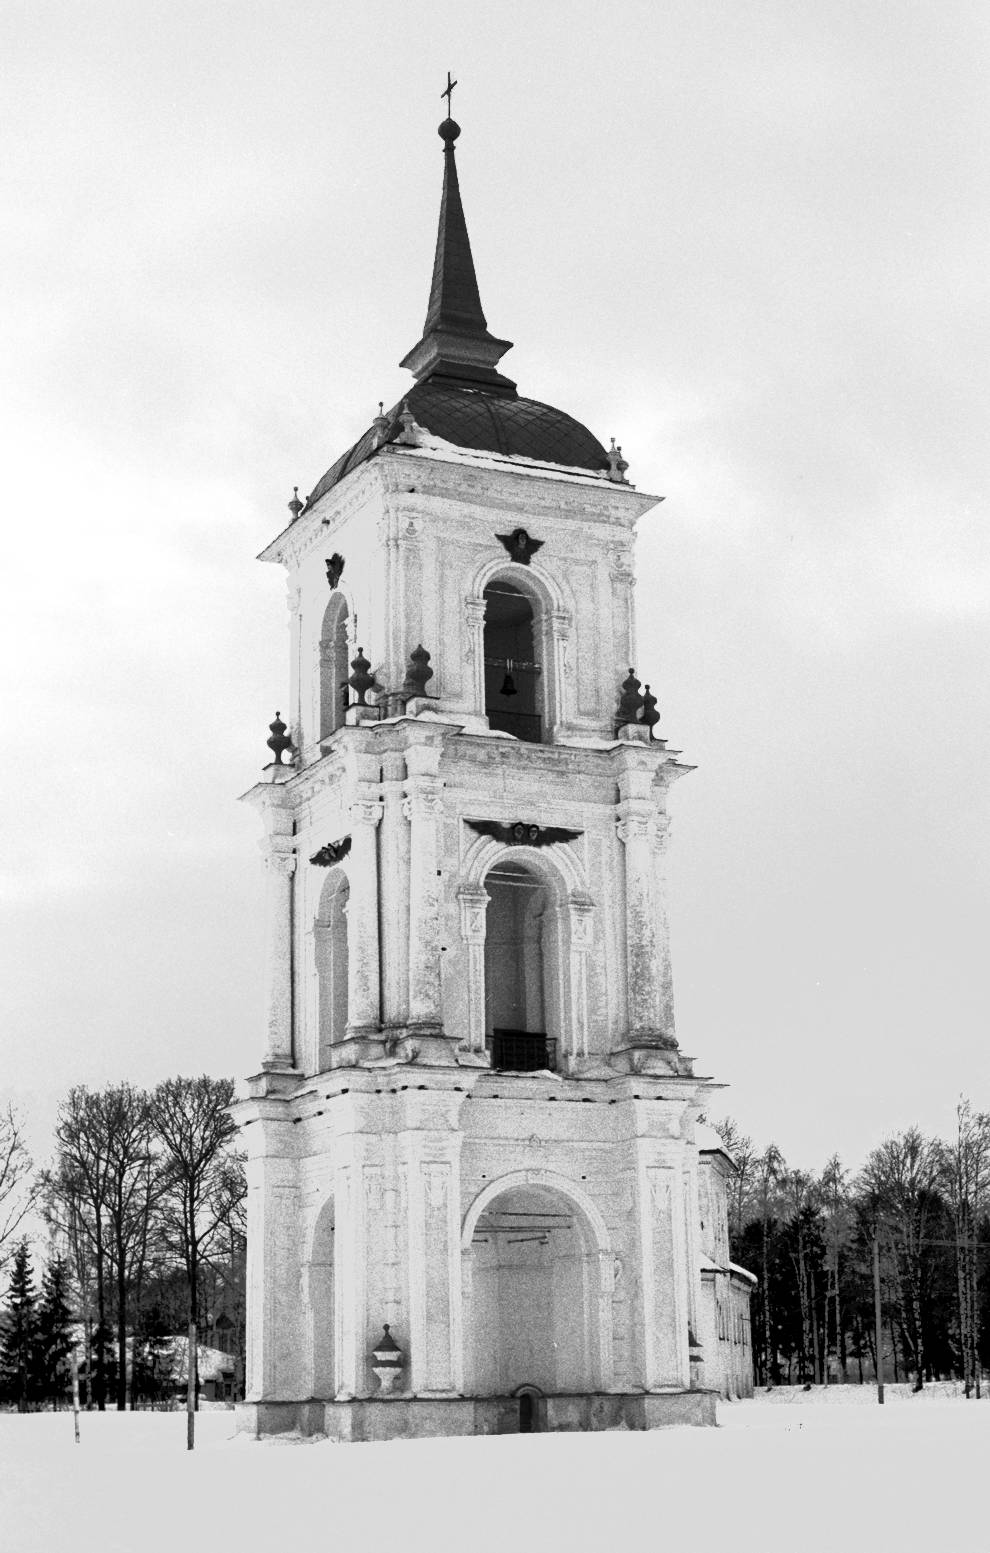 Kargopol
Russia. Arkhangelsk Region. Kargopol District
Cathedral bell towerSobornaia Square
1998-02-27
© Photograph by William Brumfield